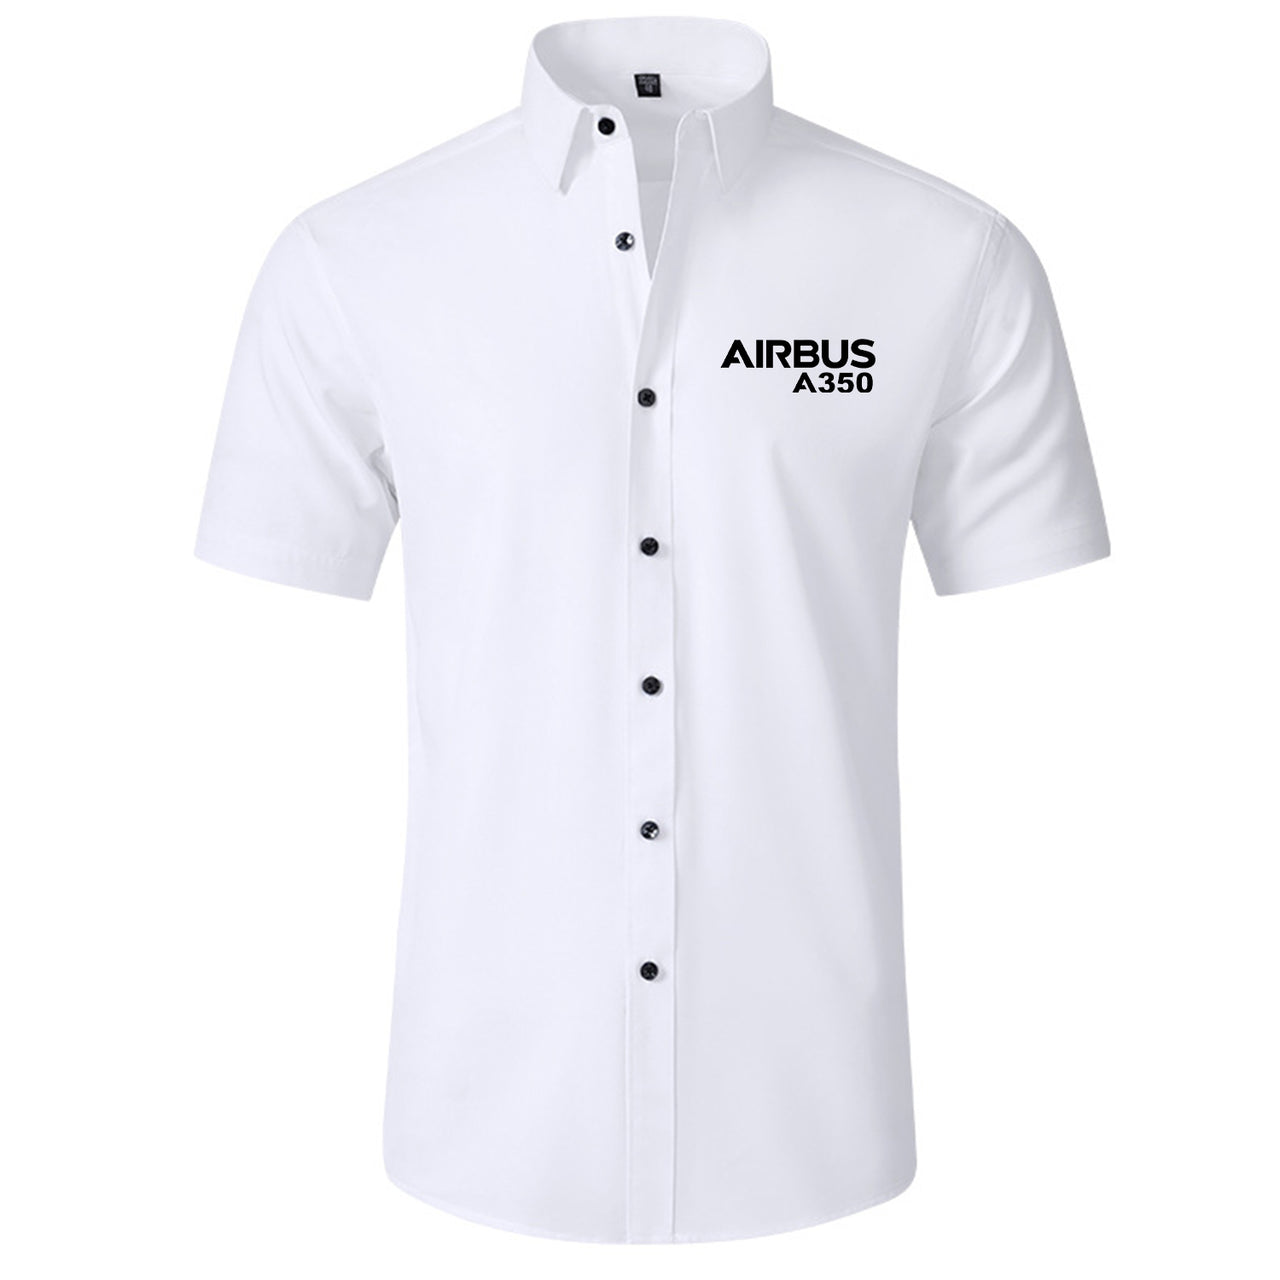 Airbus A350 & Text Designed Short Sleeve Shirts